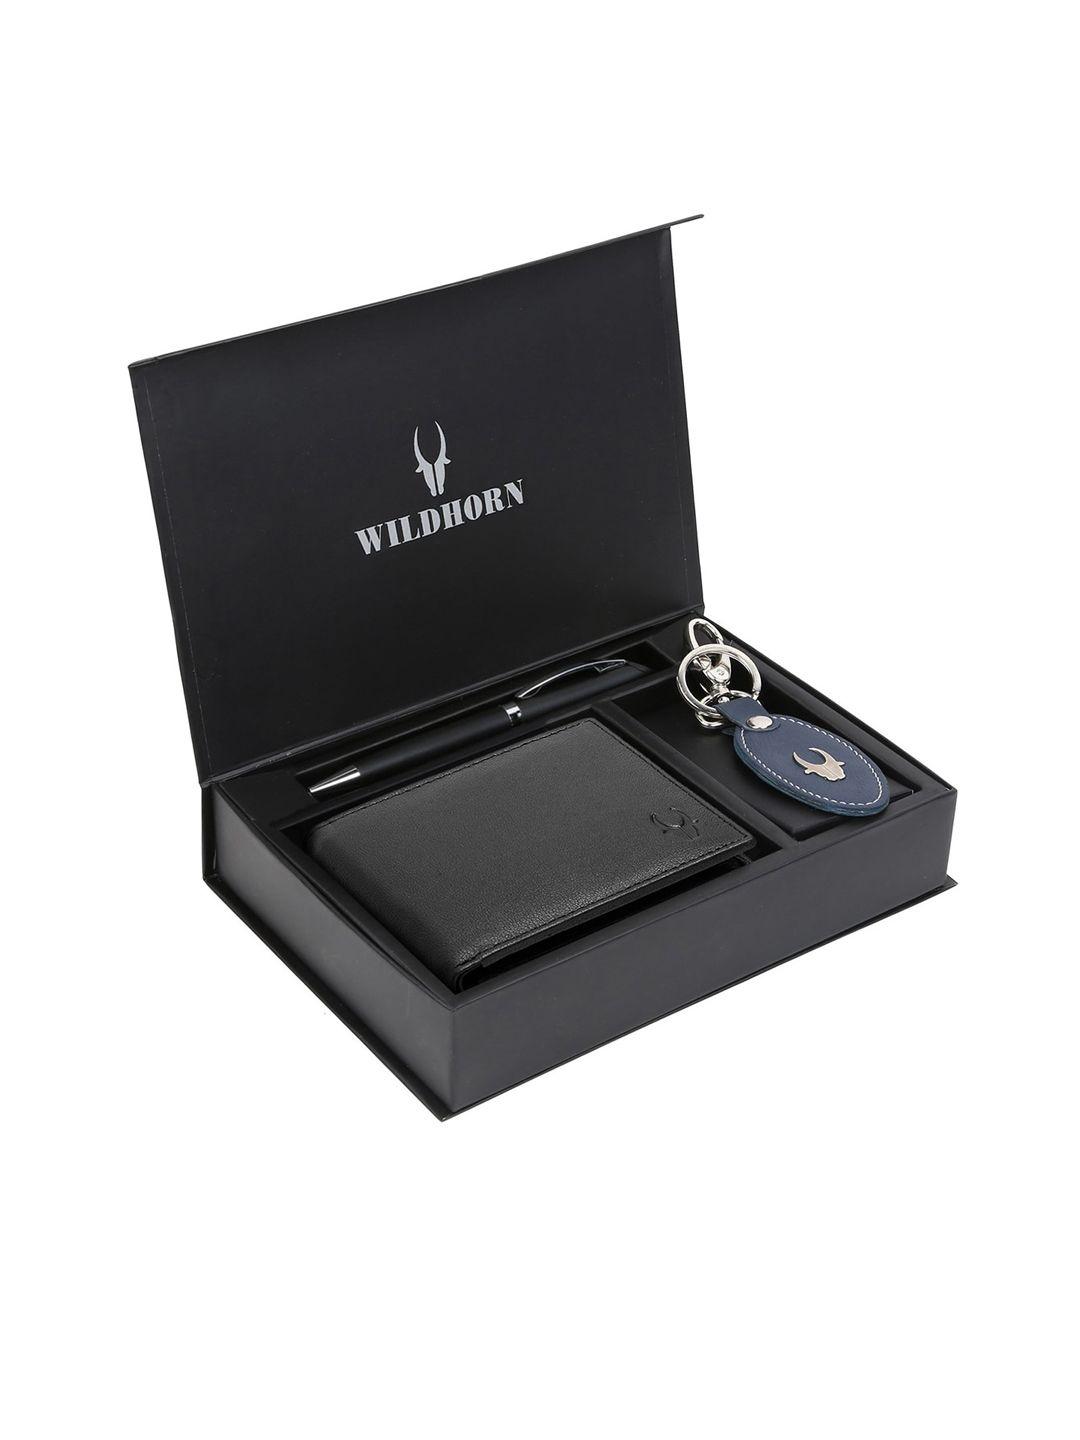 wildhorn men black & blue rfid protected genuine high quality leather accessory gift set